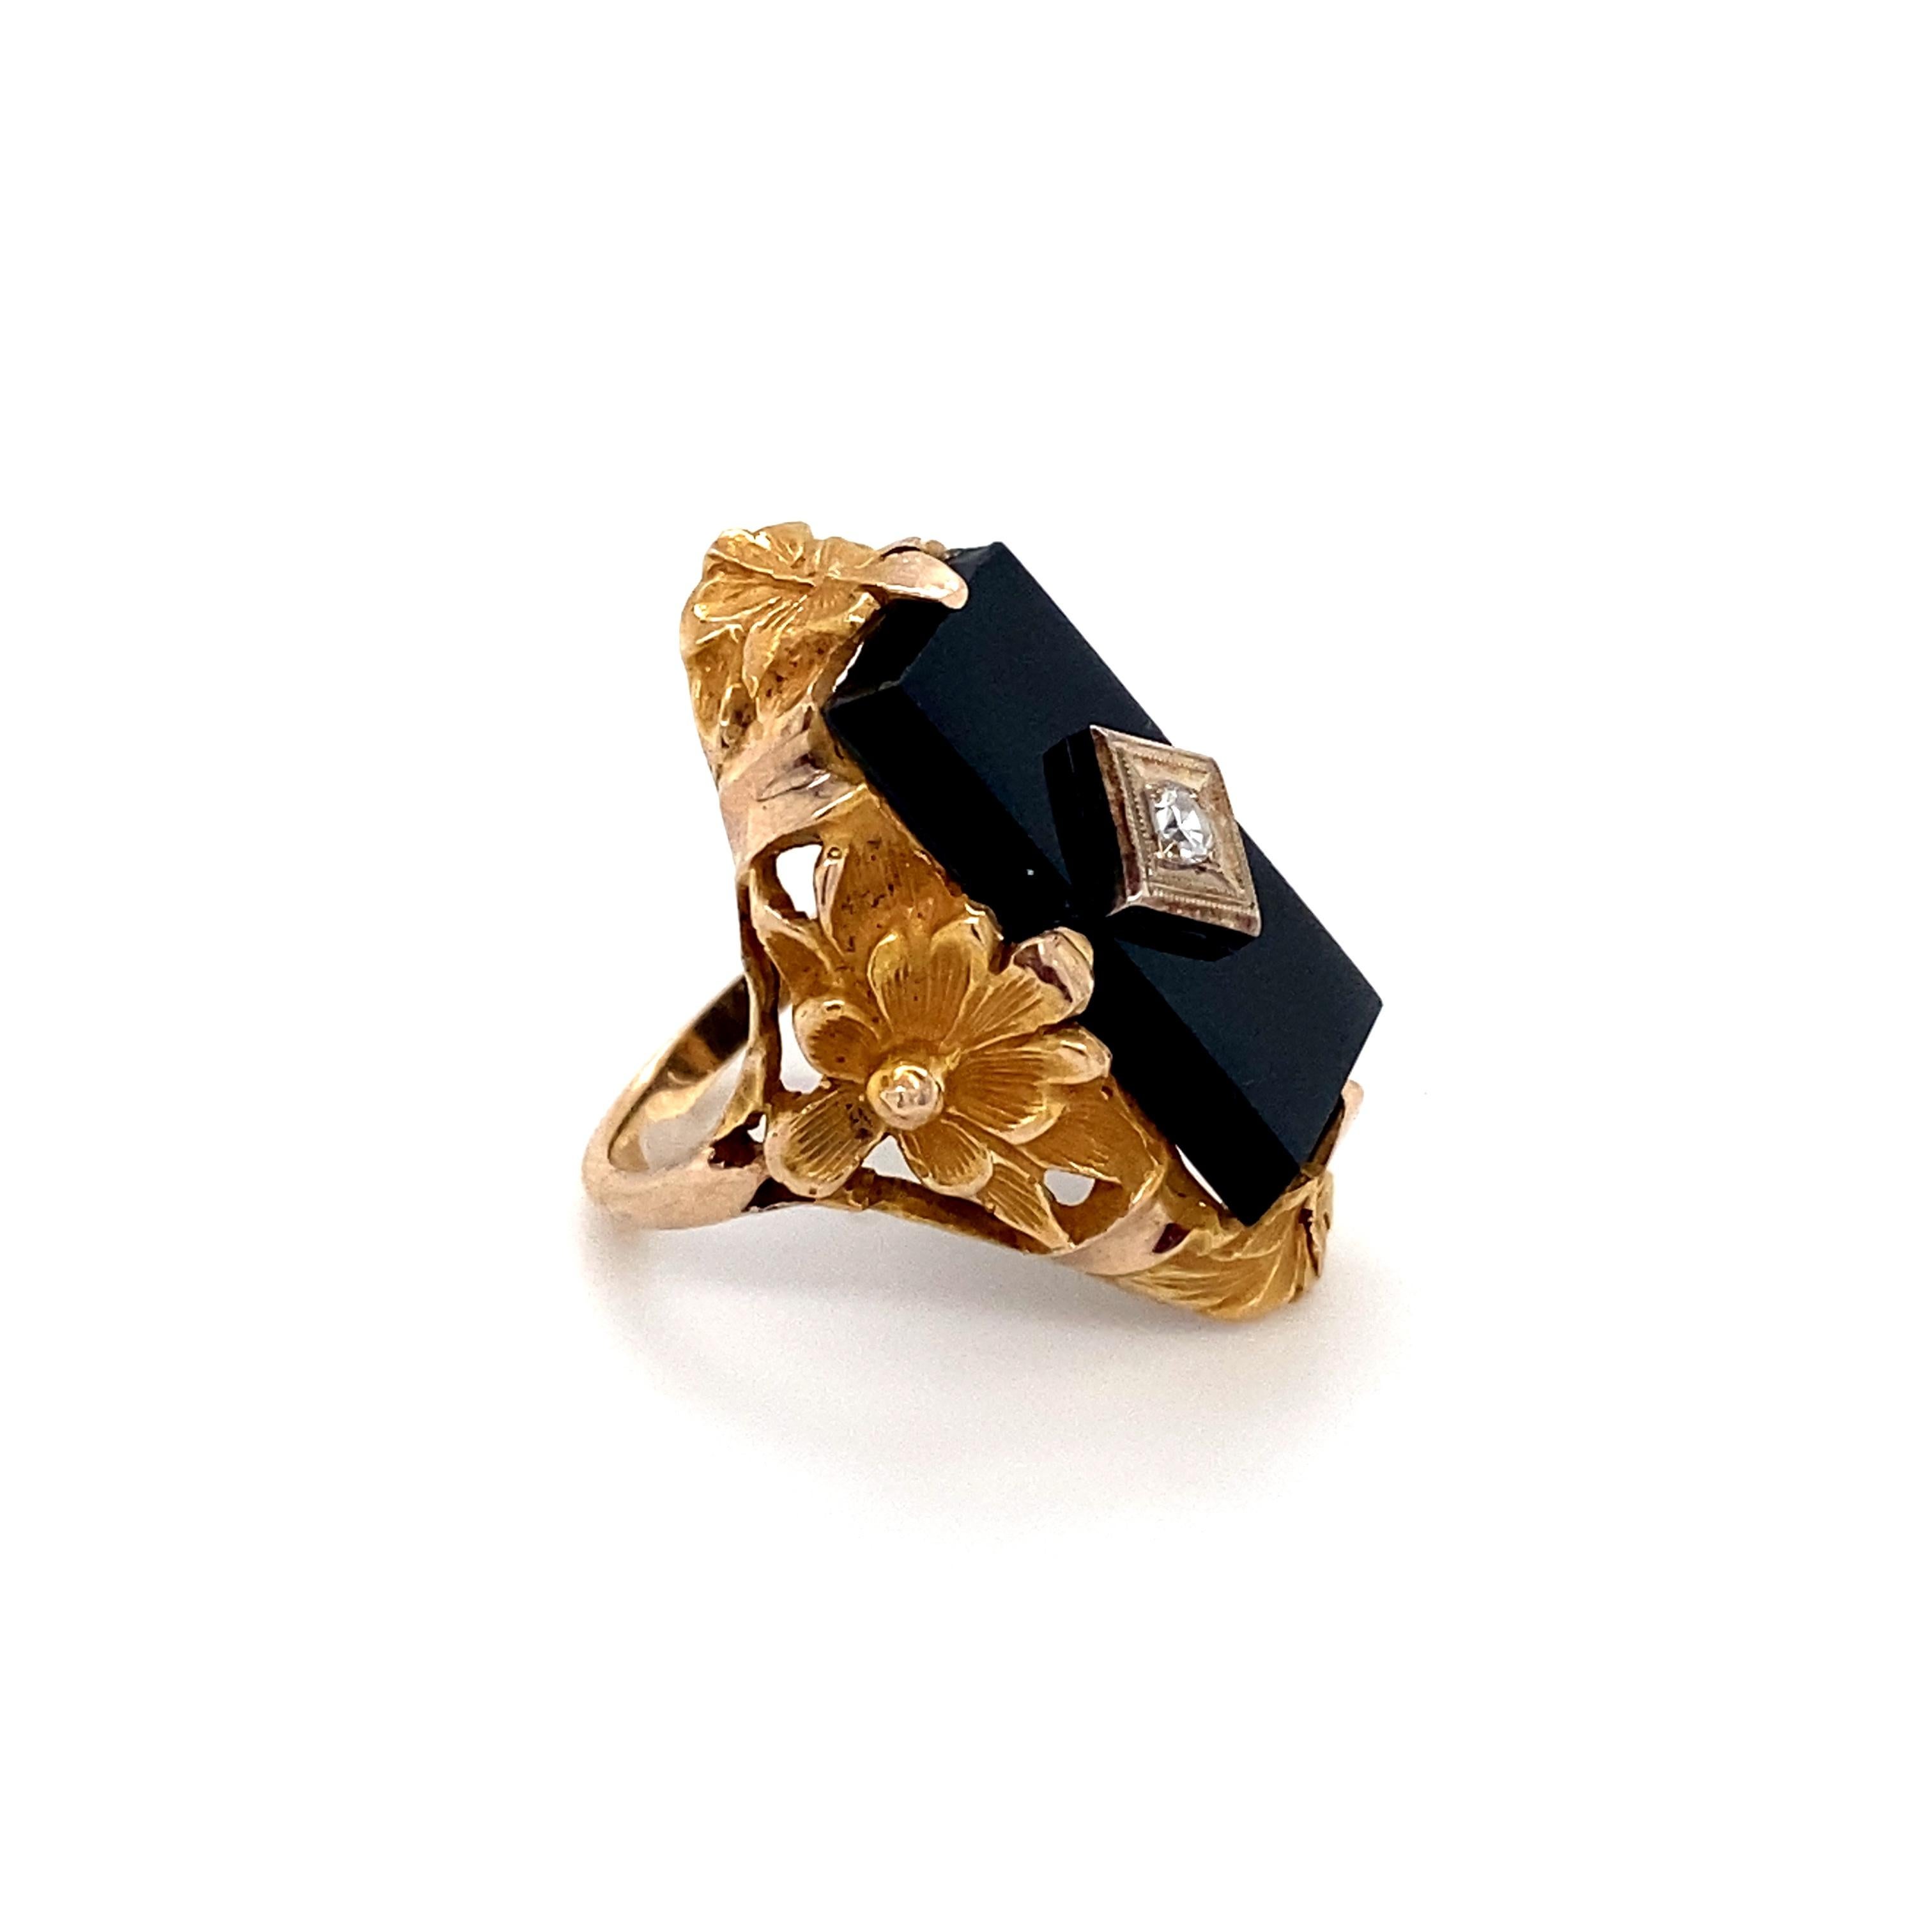 Round Cut 1920s Art Deco Onyx and Diamond Floral Ring in 14 Karat Gold